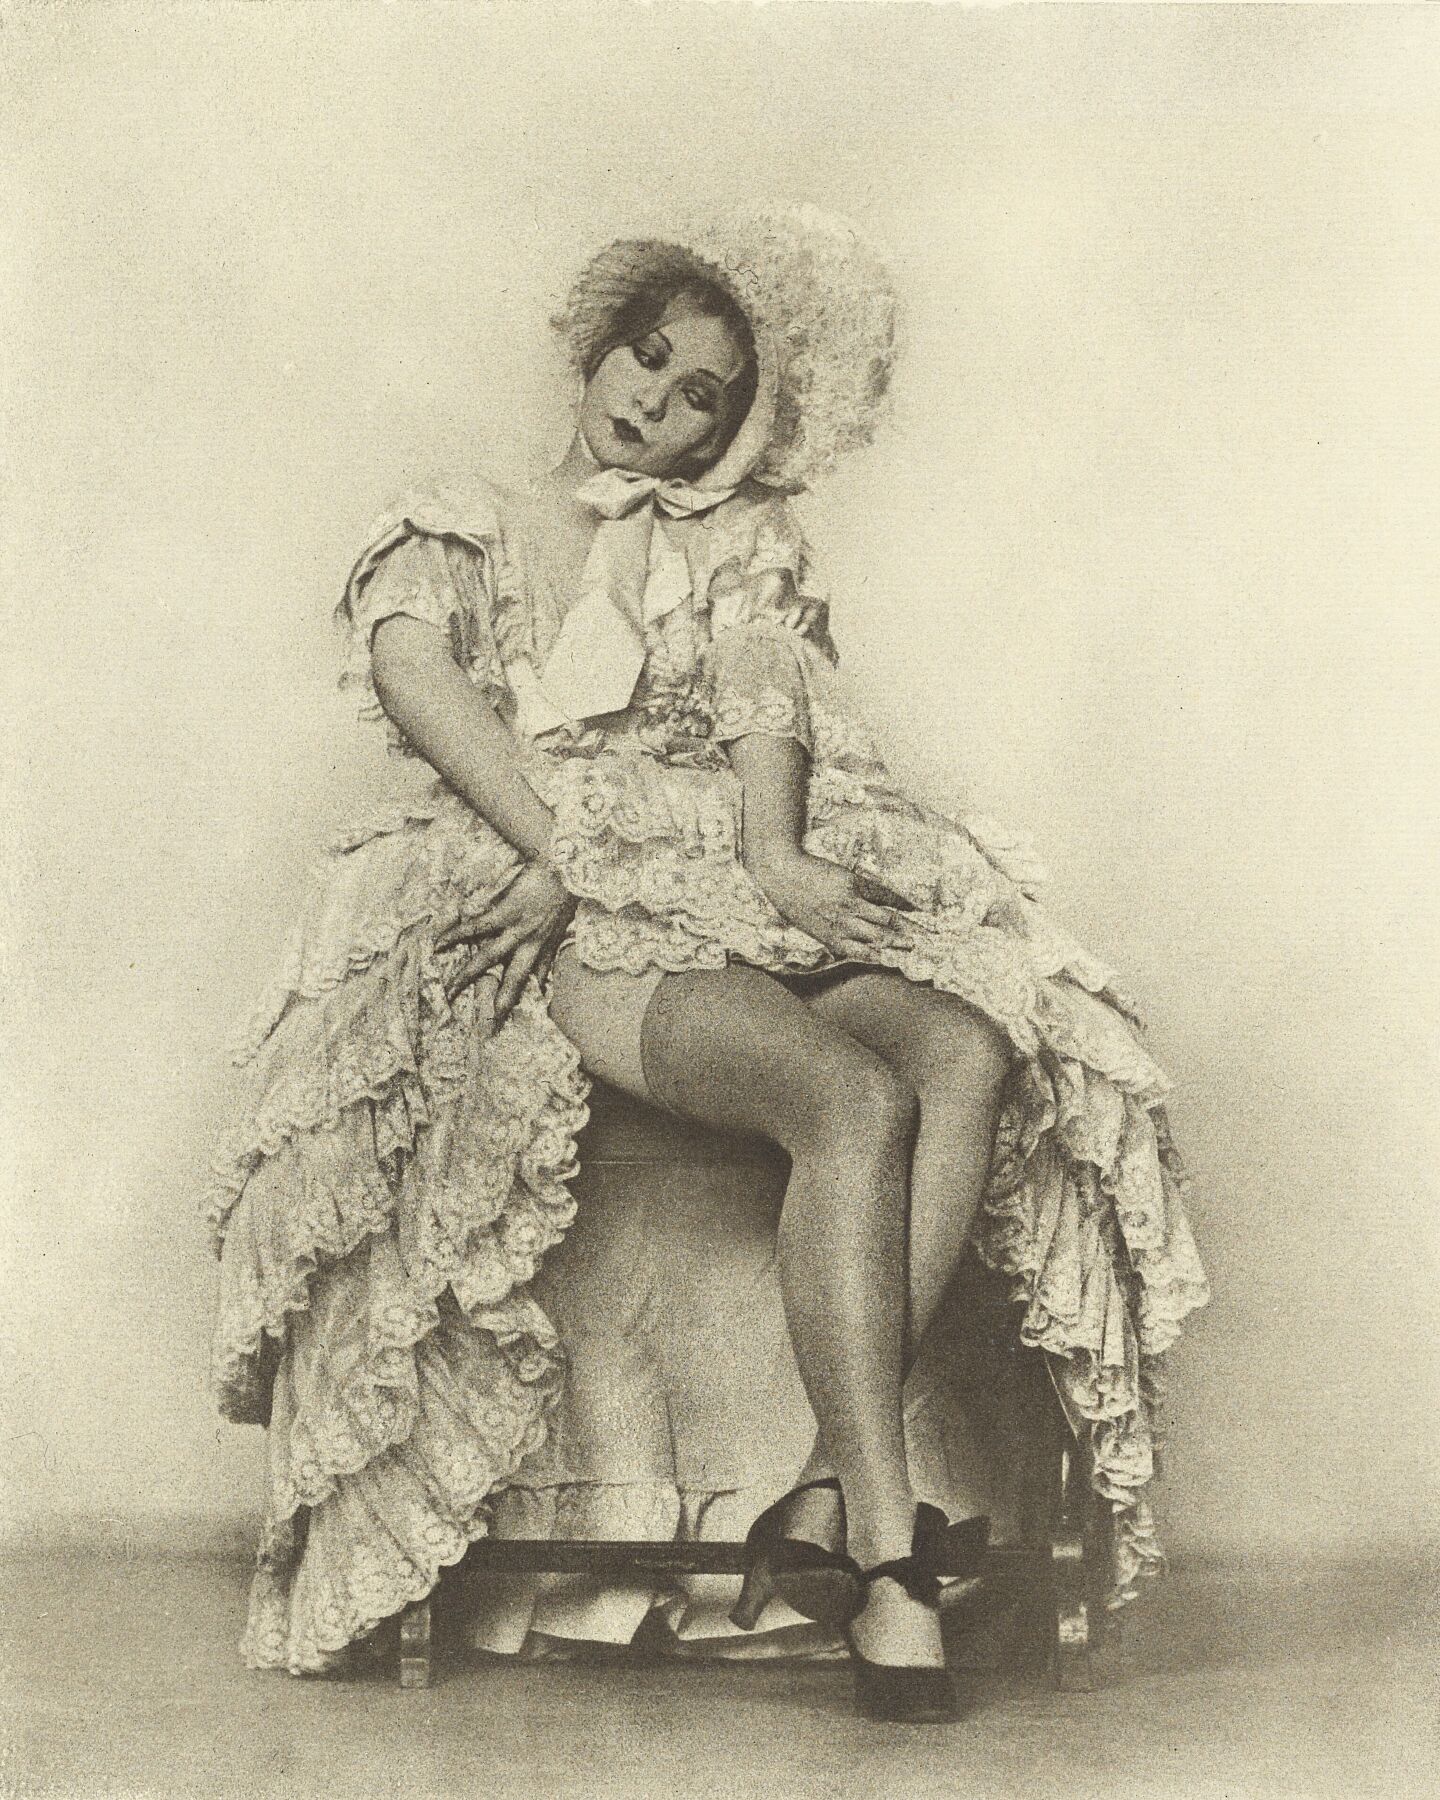 Seated Woman in a Ruffled Dress with Coquettish Facial Expression by Arthur F. Kales - c.1920